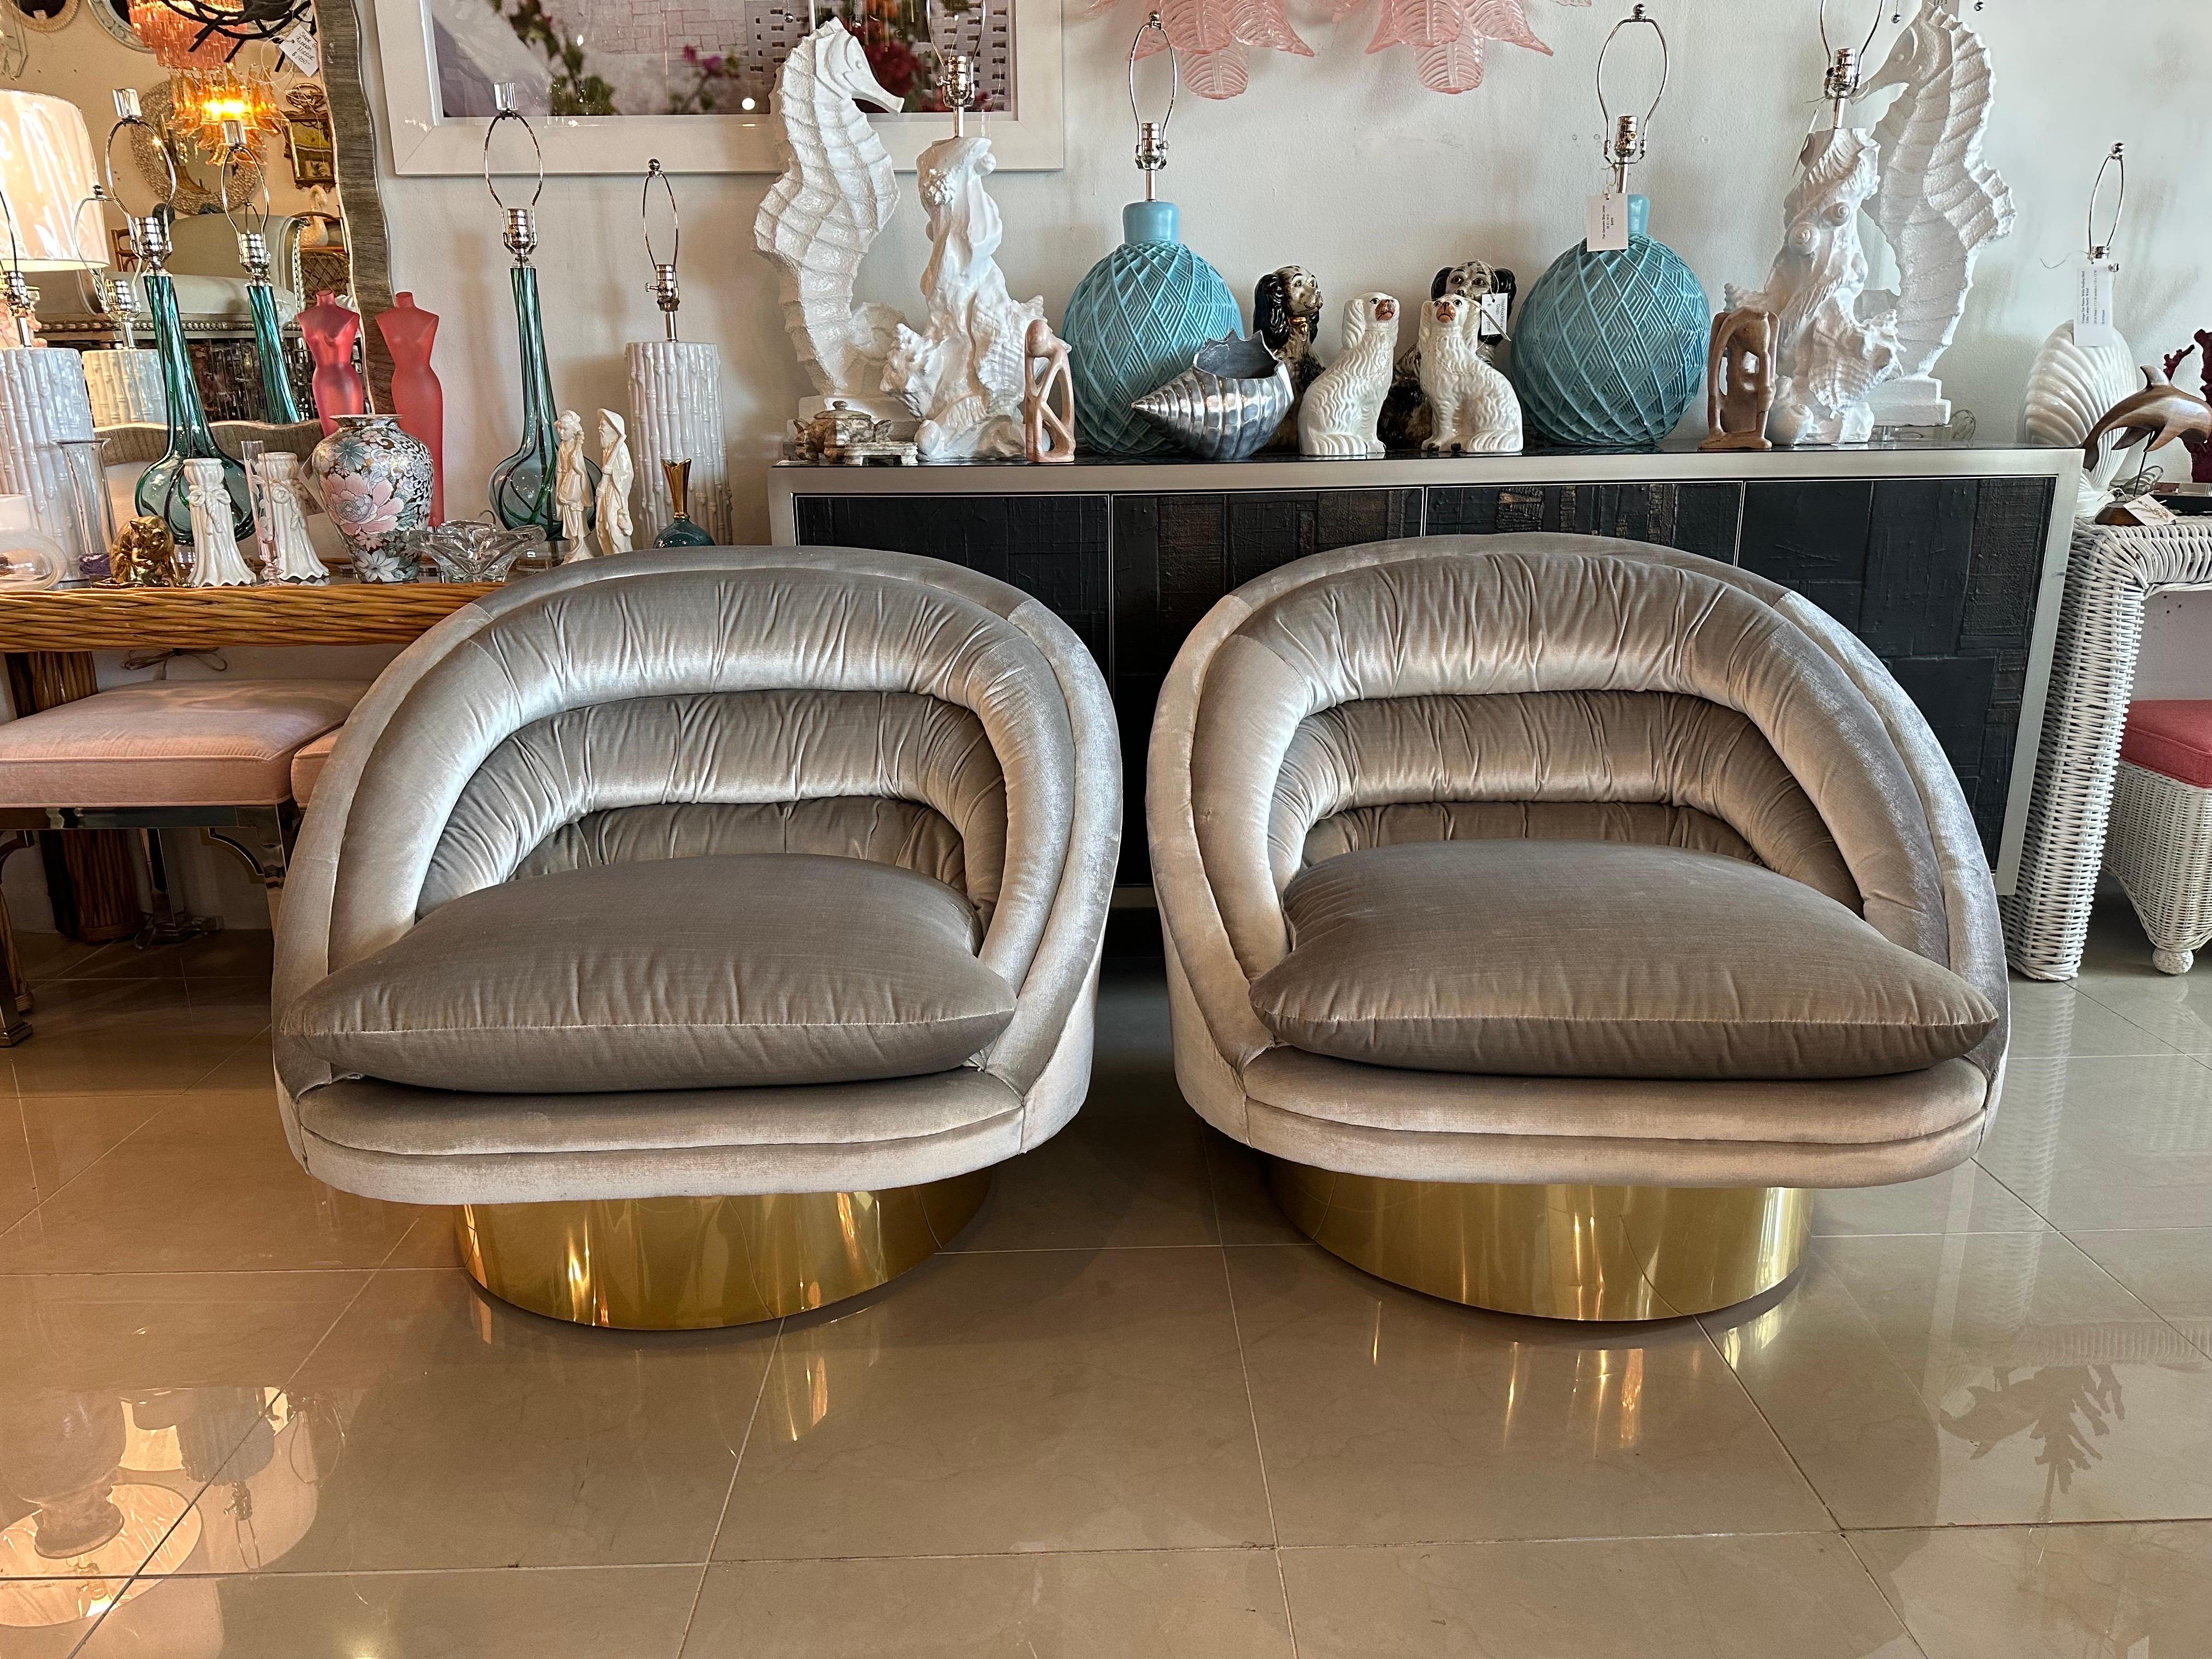 Pair of vintage Crescent chairs on brass bases with newly upholstered platinum Fabricut velvet. We had these done with a removable bottom cushion and zipper so it can be removed for dry cleaning if needed. It can also be flipped. The underneath